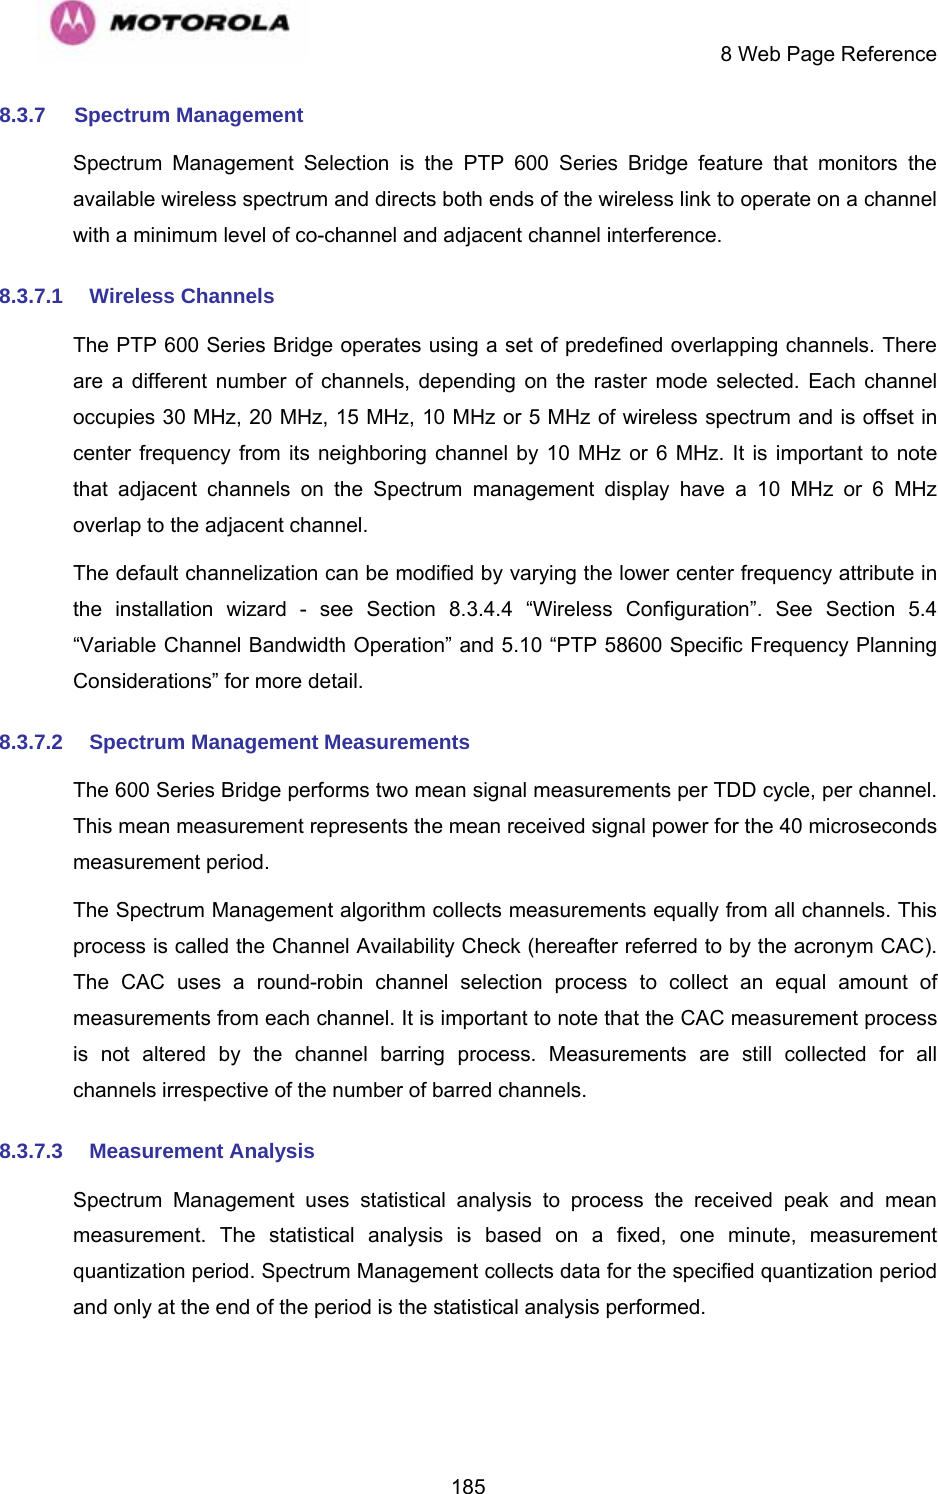     8 Web Page Reference  1858.3.7  Spectrum Management  Spectrum Management Selection is the PTP 600 Series Bridge feature that monitors the available wireless spectrum and directs both ends of the wireless link to operate on a channel with a minimum level of co-channel and adjacent channel interference. 8.3.7.1 Wireless Channels The PTP 600 Series Bridge operates using a set of predefined overlapping channels. There are a different number of channels, depending on the raster mode selected. Each channel occupies 30 MHz, 20 MHz, 15 MHz, 10 MHz or 5 MHz of wireless spectrum and is offset in center frequency from its neighboring channel by 10 MHz or 6 MHz. It is important to note that adjacent channels on the Spectrum management display have a 10 MHz or 6 MHz overlap to the adjacent channel. The default channelization can be modified by varying the lower center frequency attribute in the installation wizard - see Section 8.3.4.4 “Wireless Configuration”. See Section 5.4 “Variable Channel Bandwidth Operation” and 5.10 “PTP 58600 Specific Frequency Planning Considerations” for more detail. 8.3.7.2 Spectrum Management Measurements The 600 Series Bridge performs two mean signal measurements per TDD cycle, per channel. This mean measurement represents the mean received signal power for the 40 microseconds measurement period. The Spectrum Management algorithm collects measurements equally from all channels. This process is called the Channel Availability Check (hereafter referred to by the acronym CAC). The CAC uses a round-robin channel selection process to collect an equal amount of measurements from each channel. It is important to note that the CAC measurement process is not altered by the channel barring process. Measurements are still collected for all channels irrespective of the number of barred channels. 8.3.7.3 Measurement Analysis Spectrum Management uses statistical analysis to process the received peak and mean measurement. The statistical analysis is based on a fixed, one minute, measurement quantization period. Spectrum Management collects data for the specified quantization period and only at the end of the period is the statistical analysis performed. 